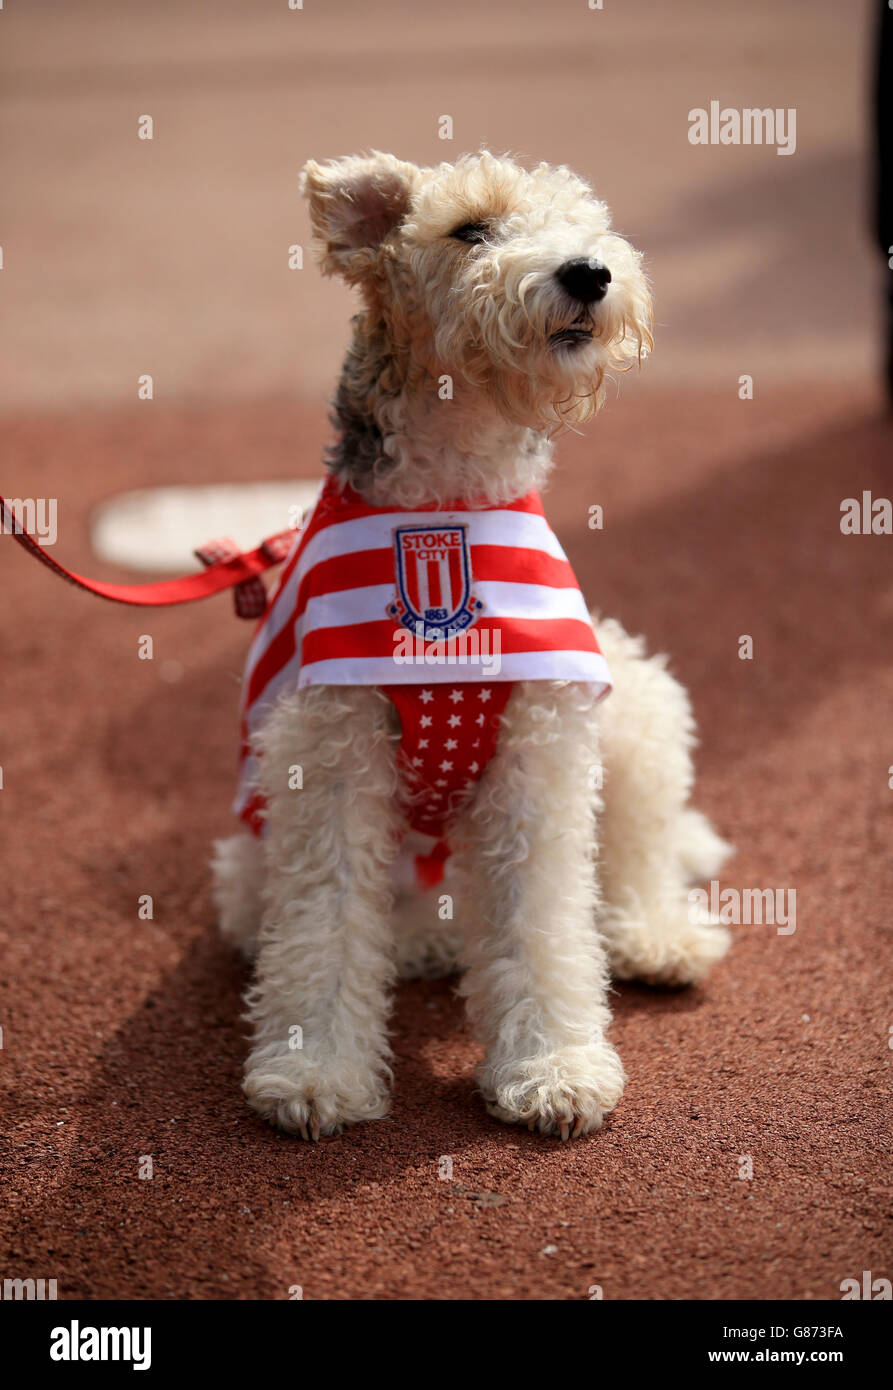 Soccer - Barclays Premier League - Stoke City v West Bromwich Albion - The Britannia Stadium. A dog shows support for Stoke City during the Barclays Premier League match at The Britannia Stadium, Stoke-upon-Trent. Stock Photo